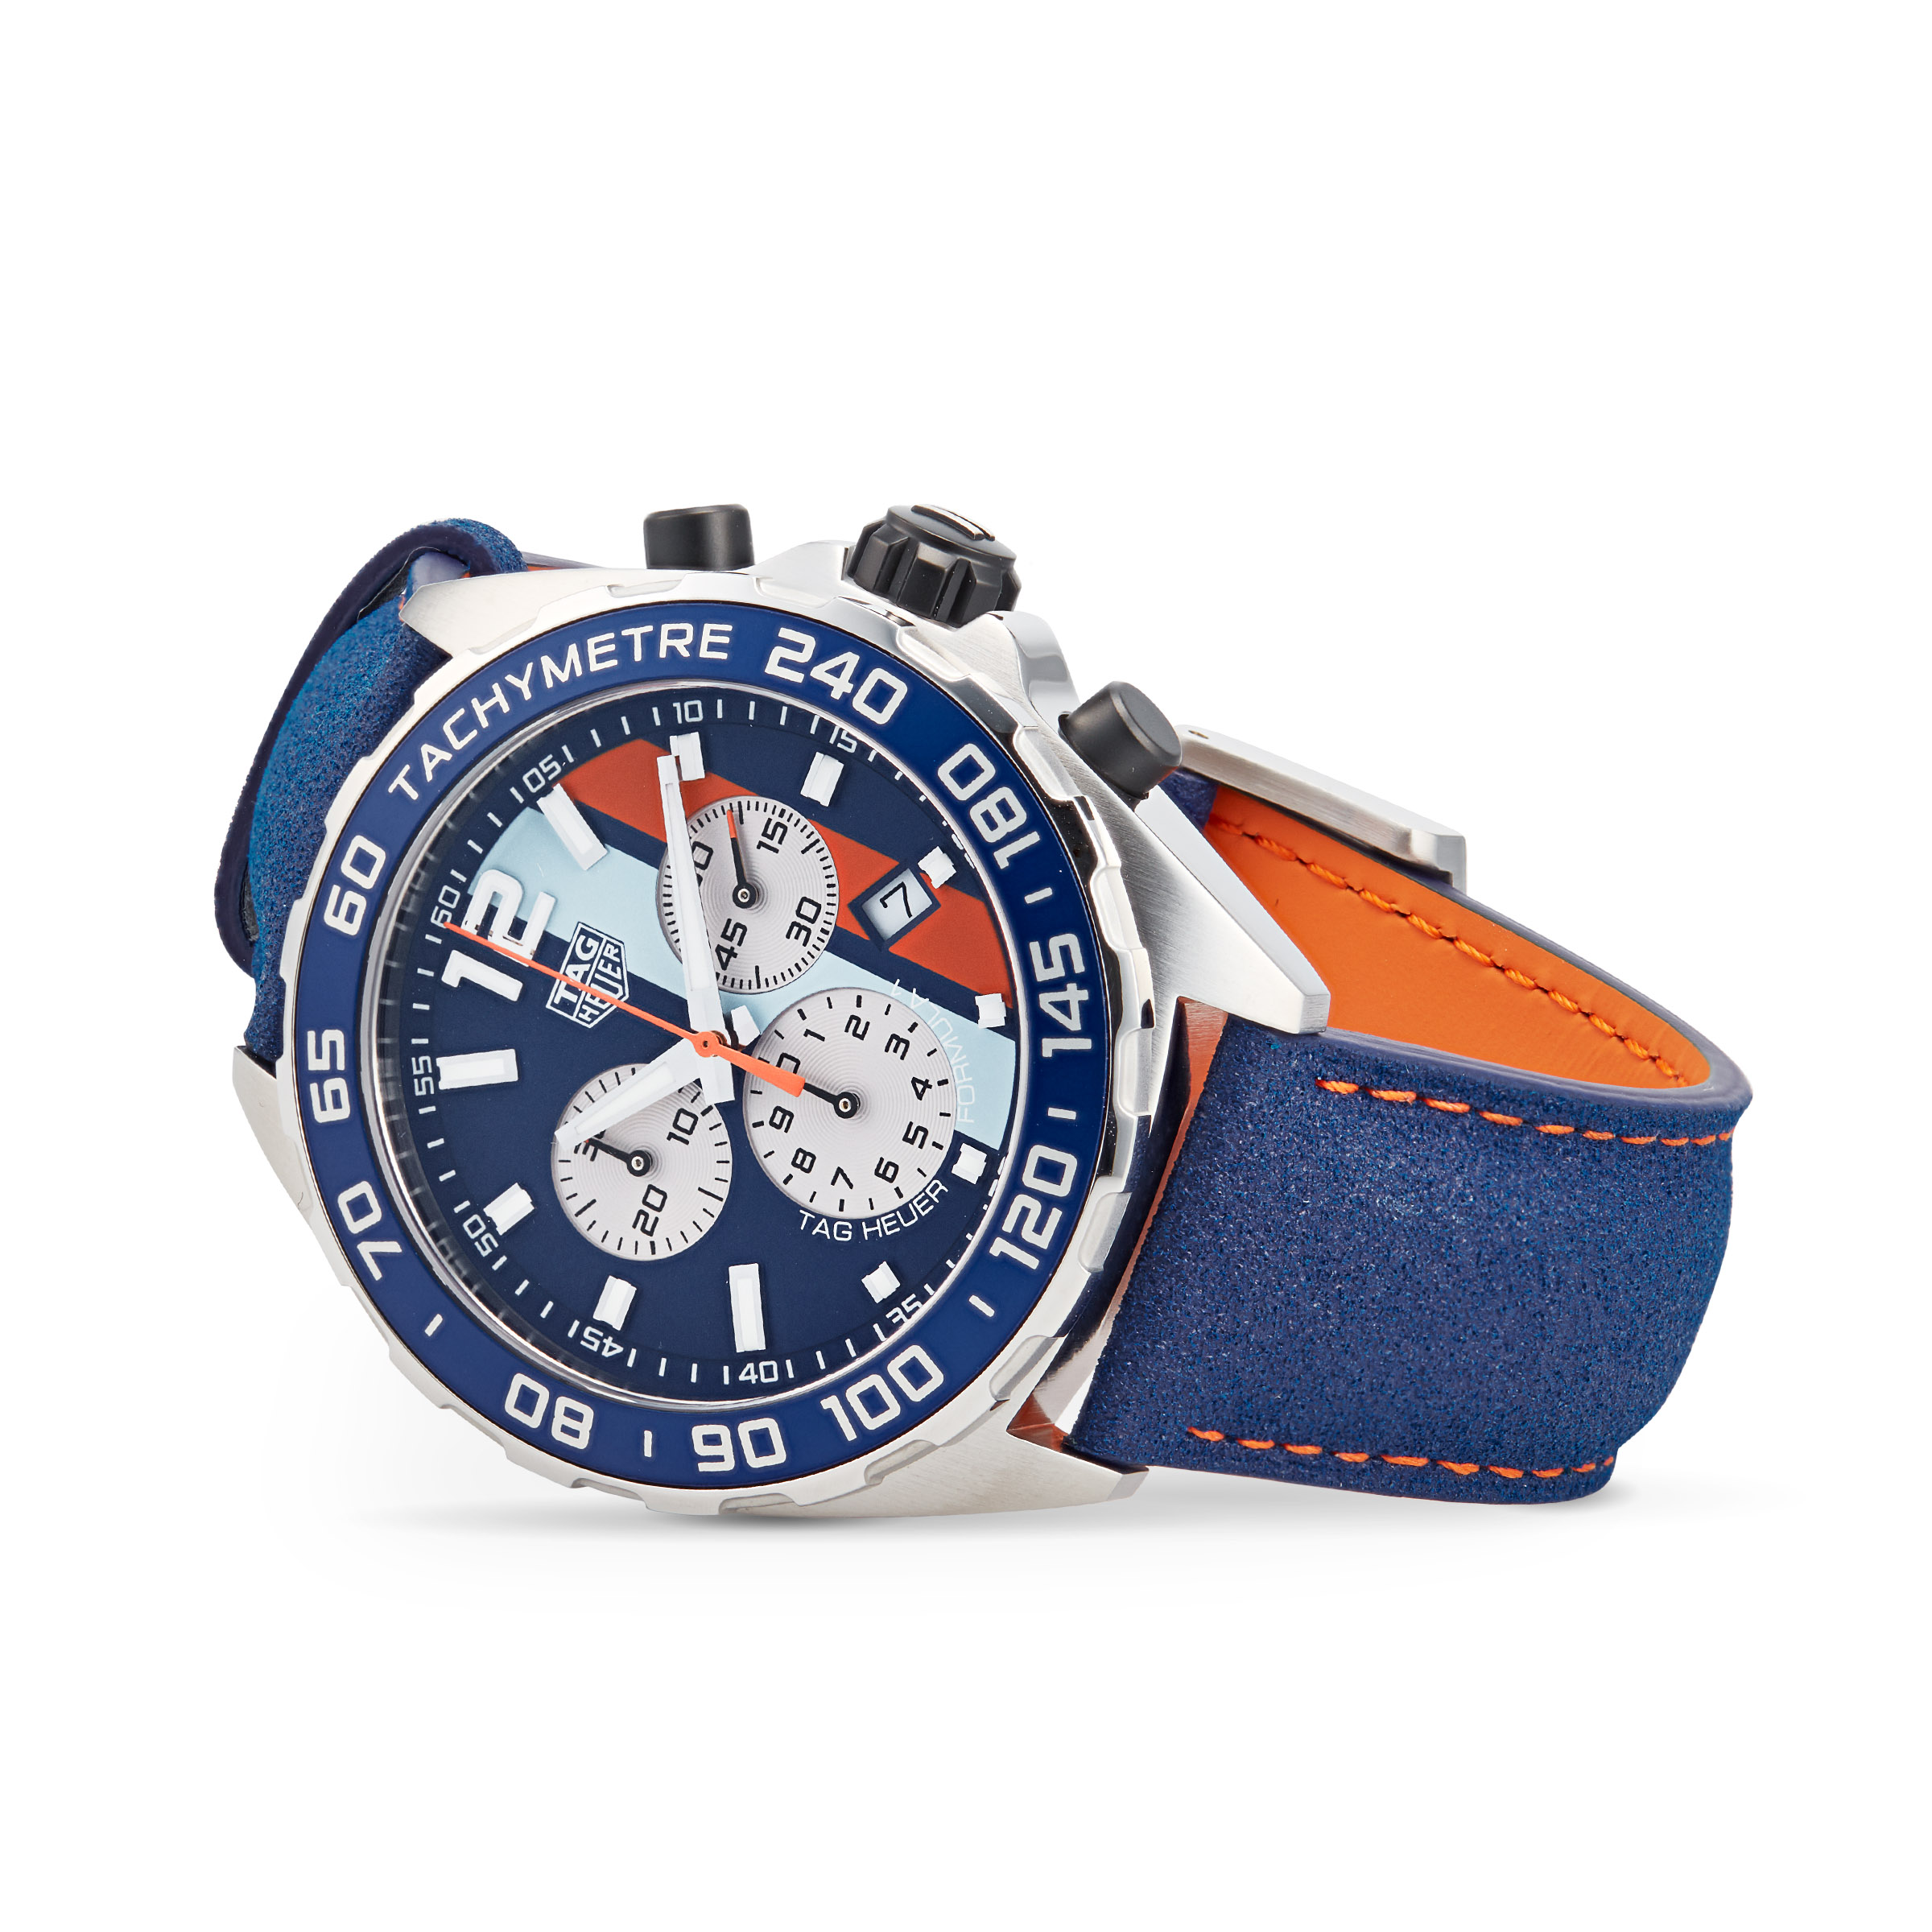 Tag Heuer Monaco Calibre 11 Chronograph Gulf Special Edition CAW211R.FC640  Tag Heuer Watch Review - YouTube